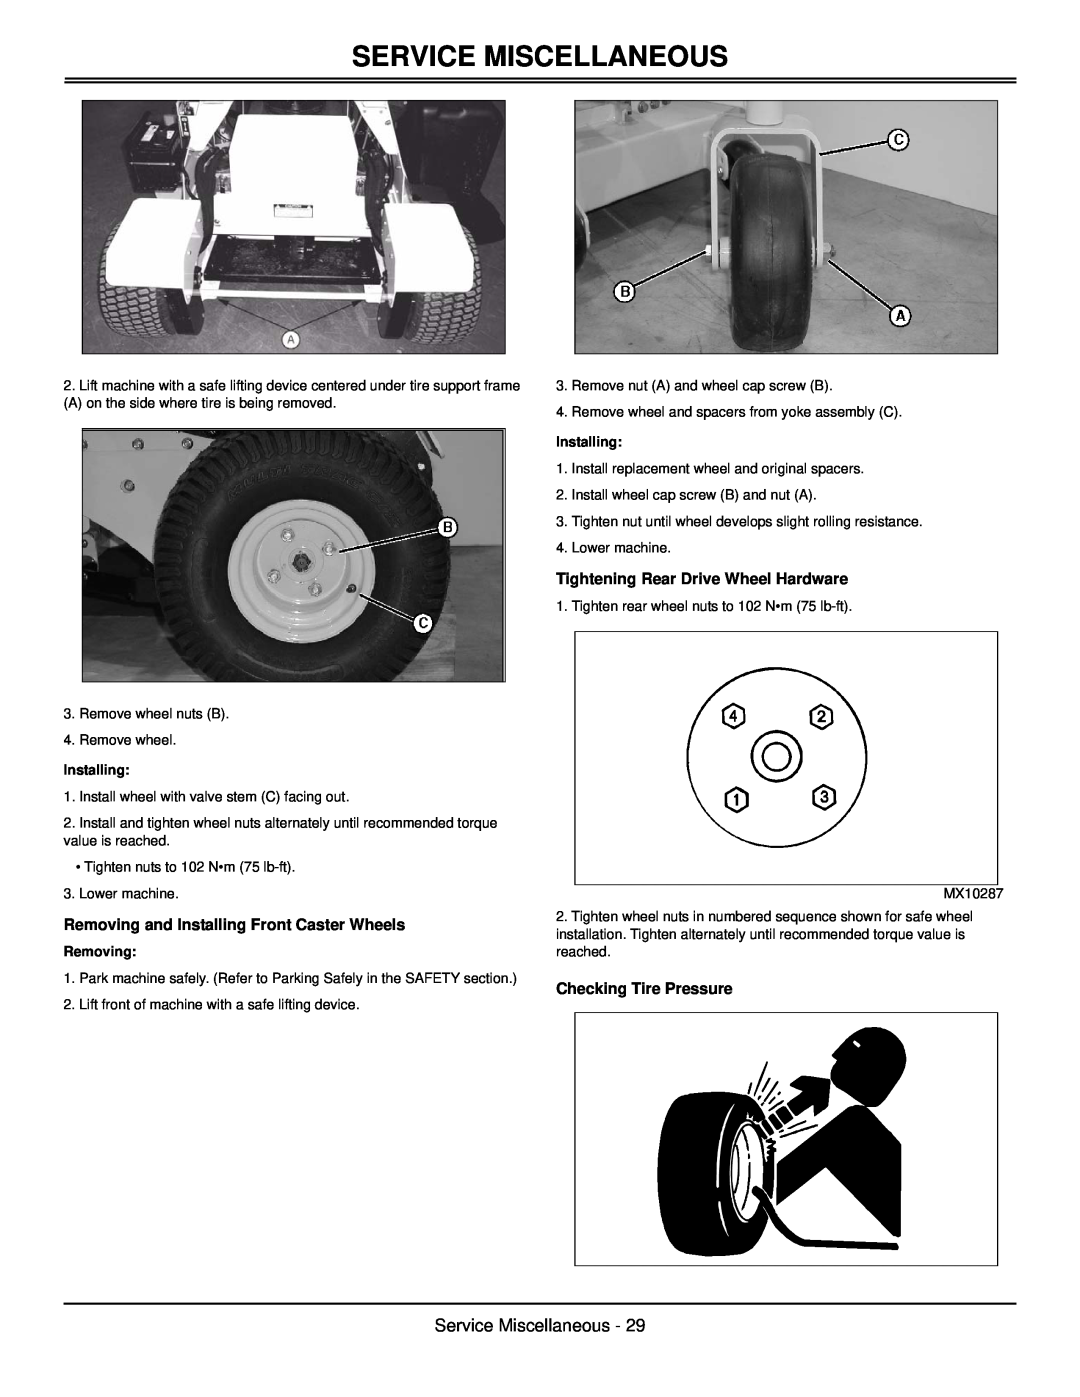 Great Dane GSRKW2352S manual Service Miscellaneous, Removing and Installing Front Caster Wheels, Checking Tire Pressure 